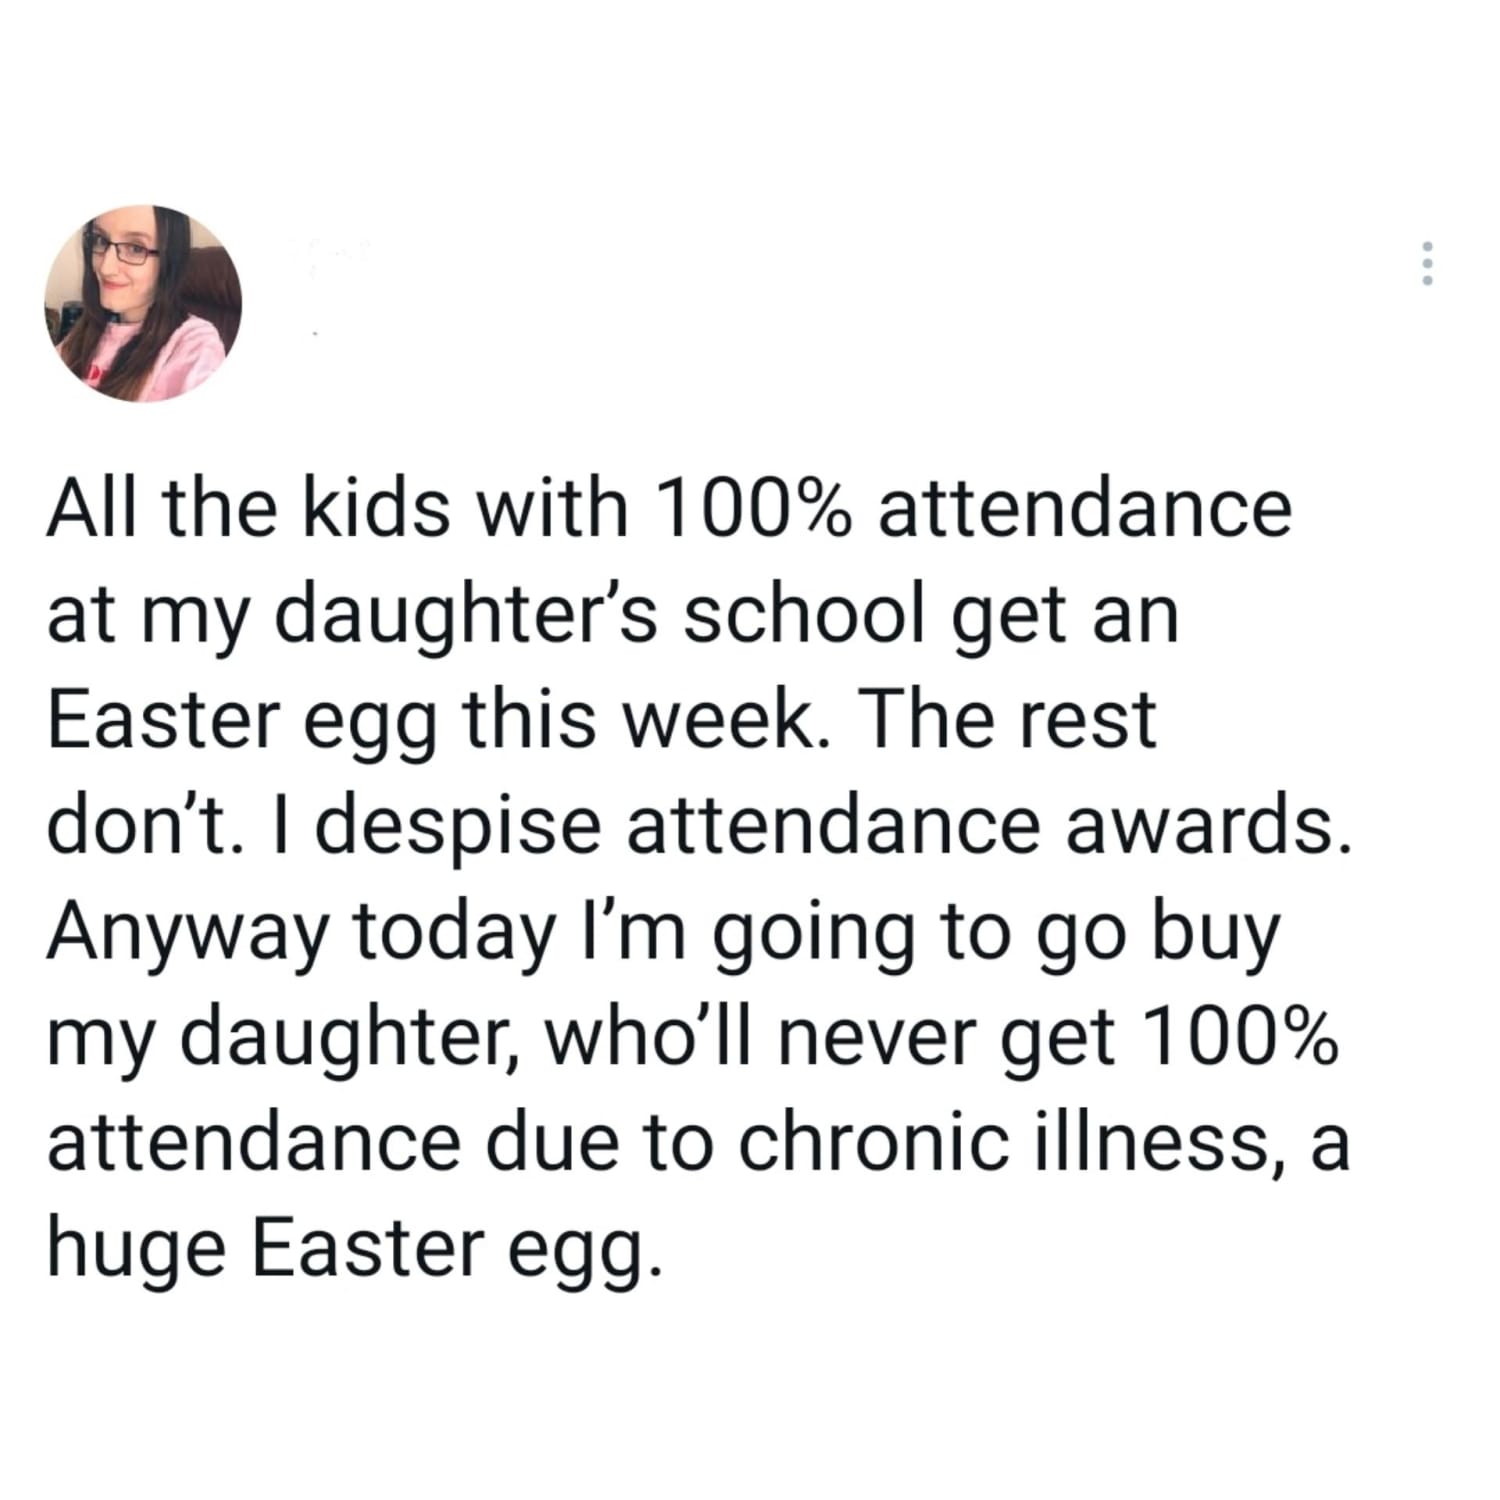 This woman spoiling her daughter on Easter.